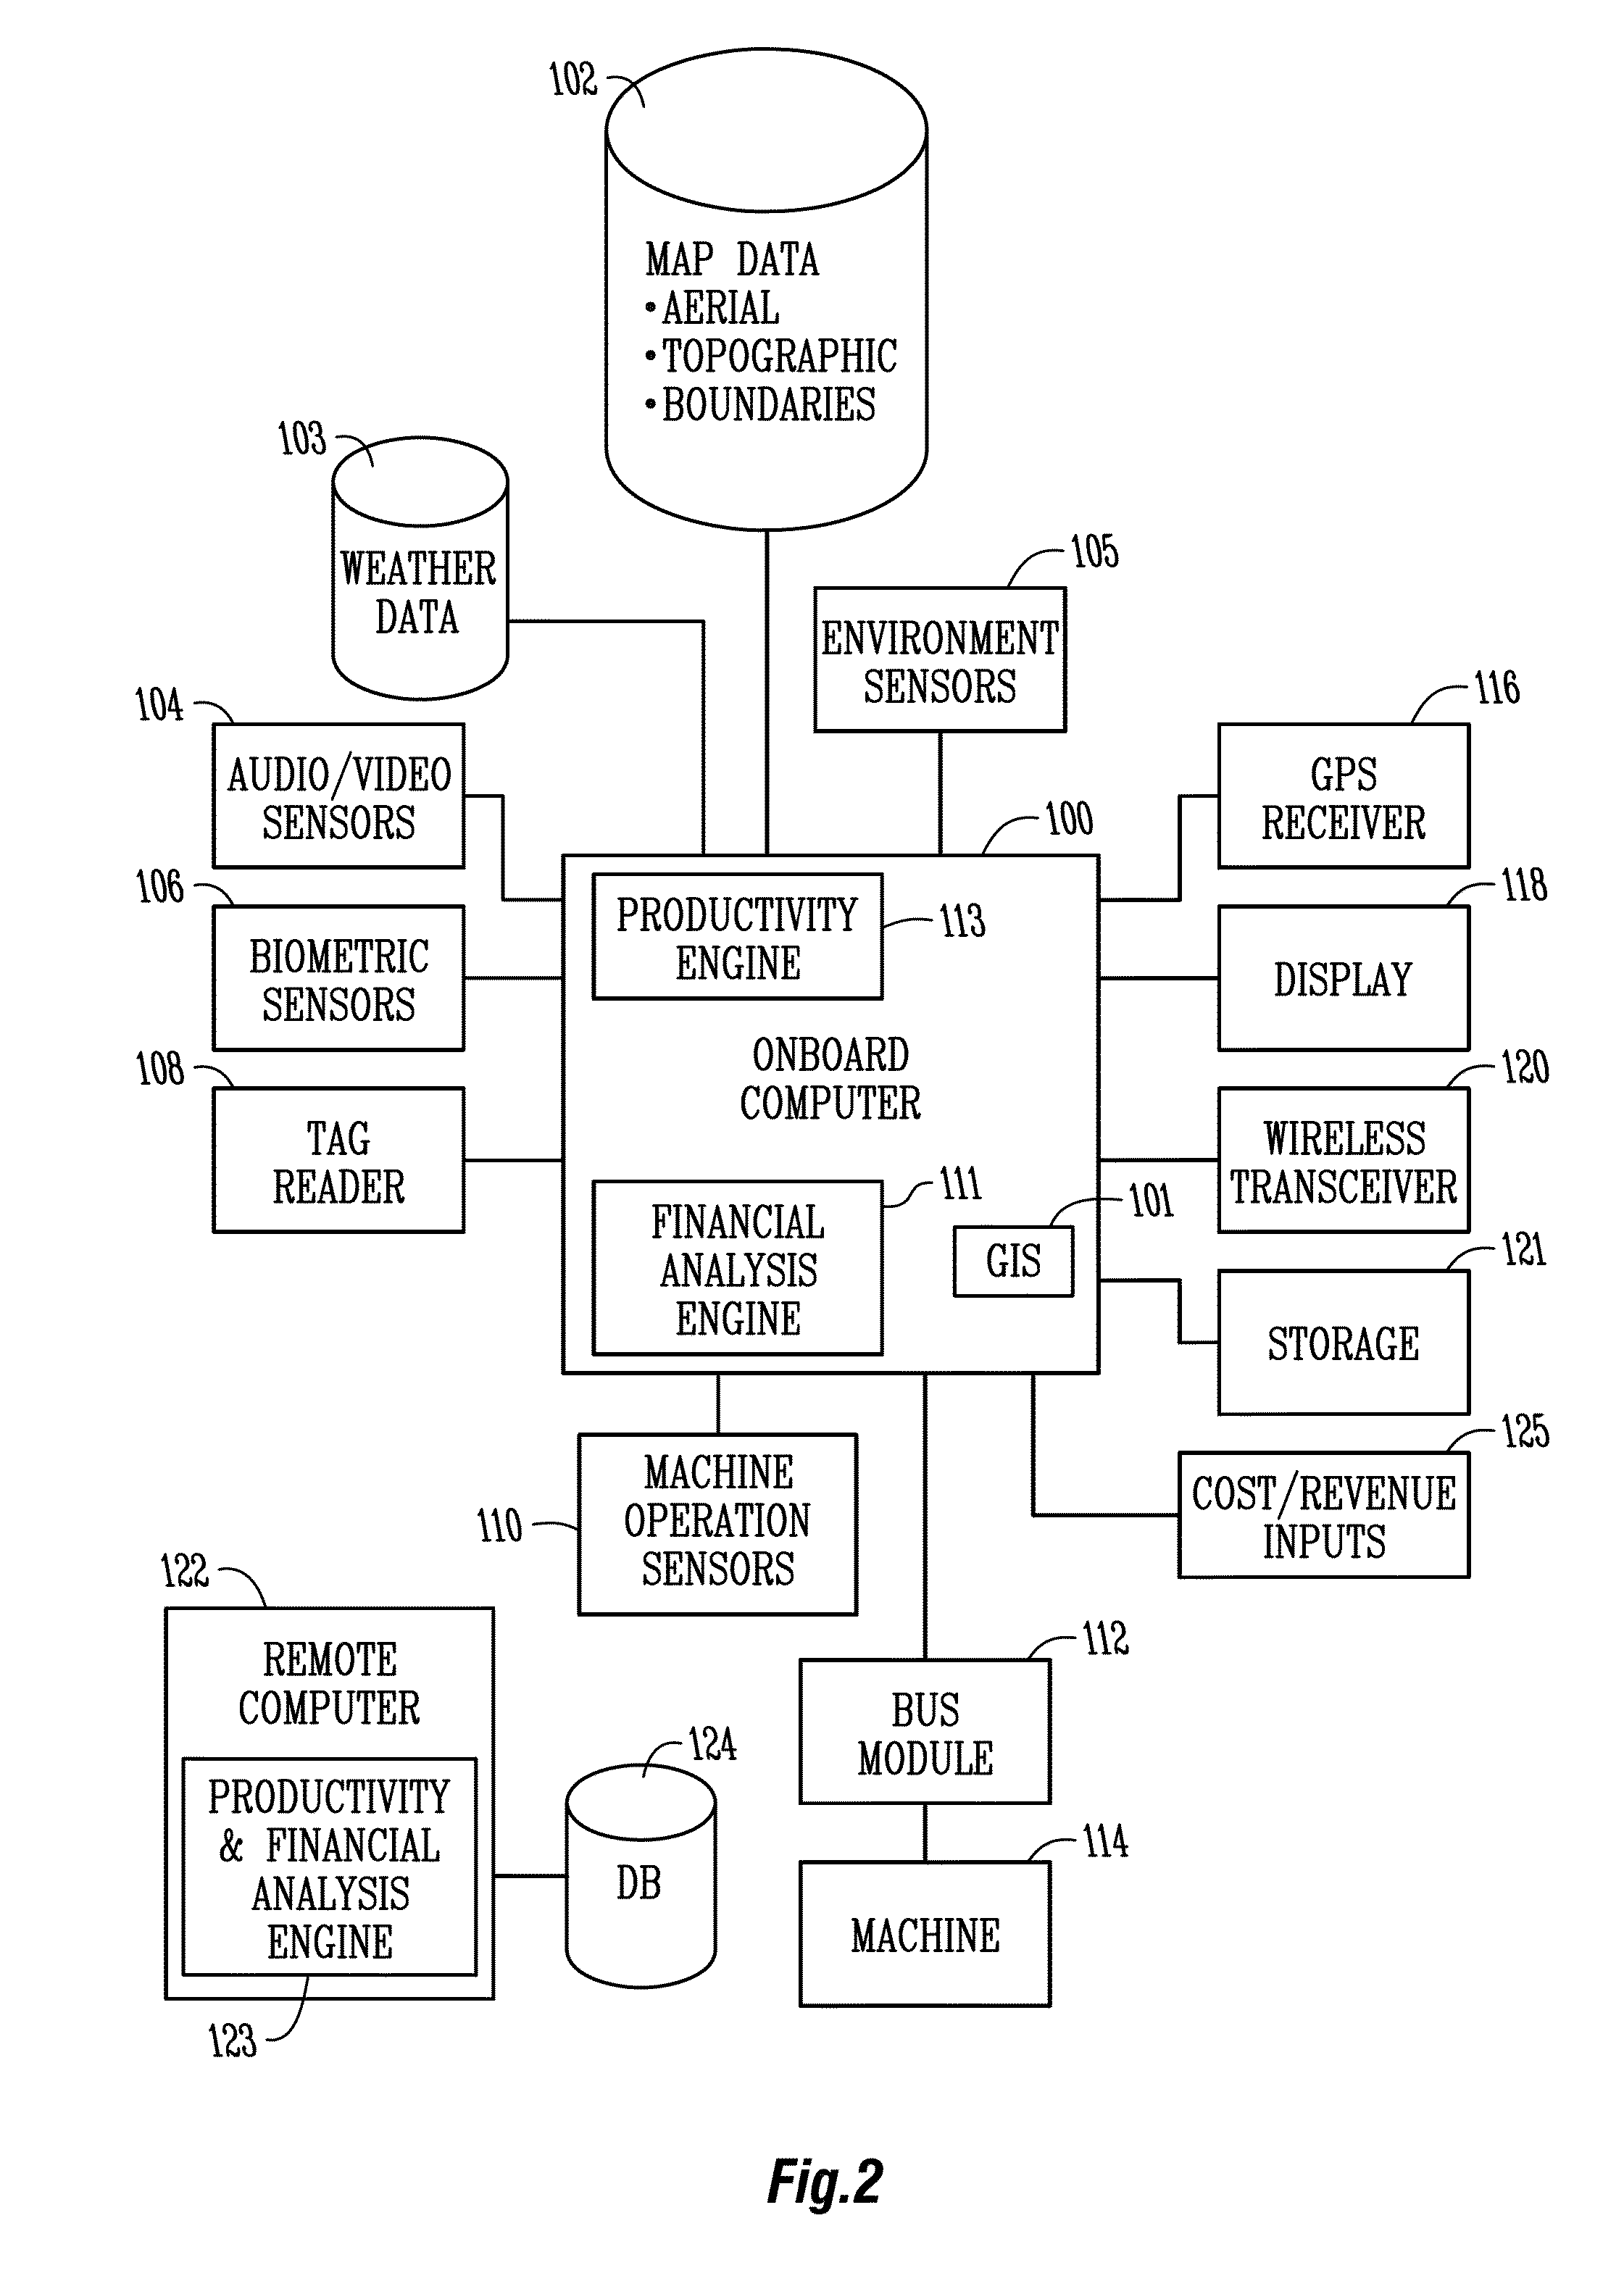 Method and systems for monitoring machine and operator productivity and profitability